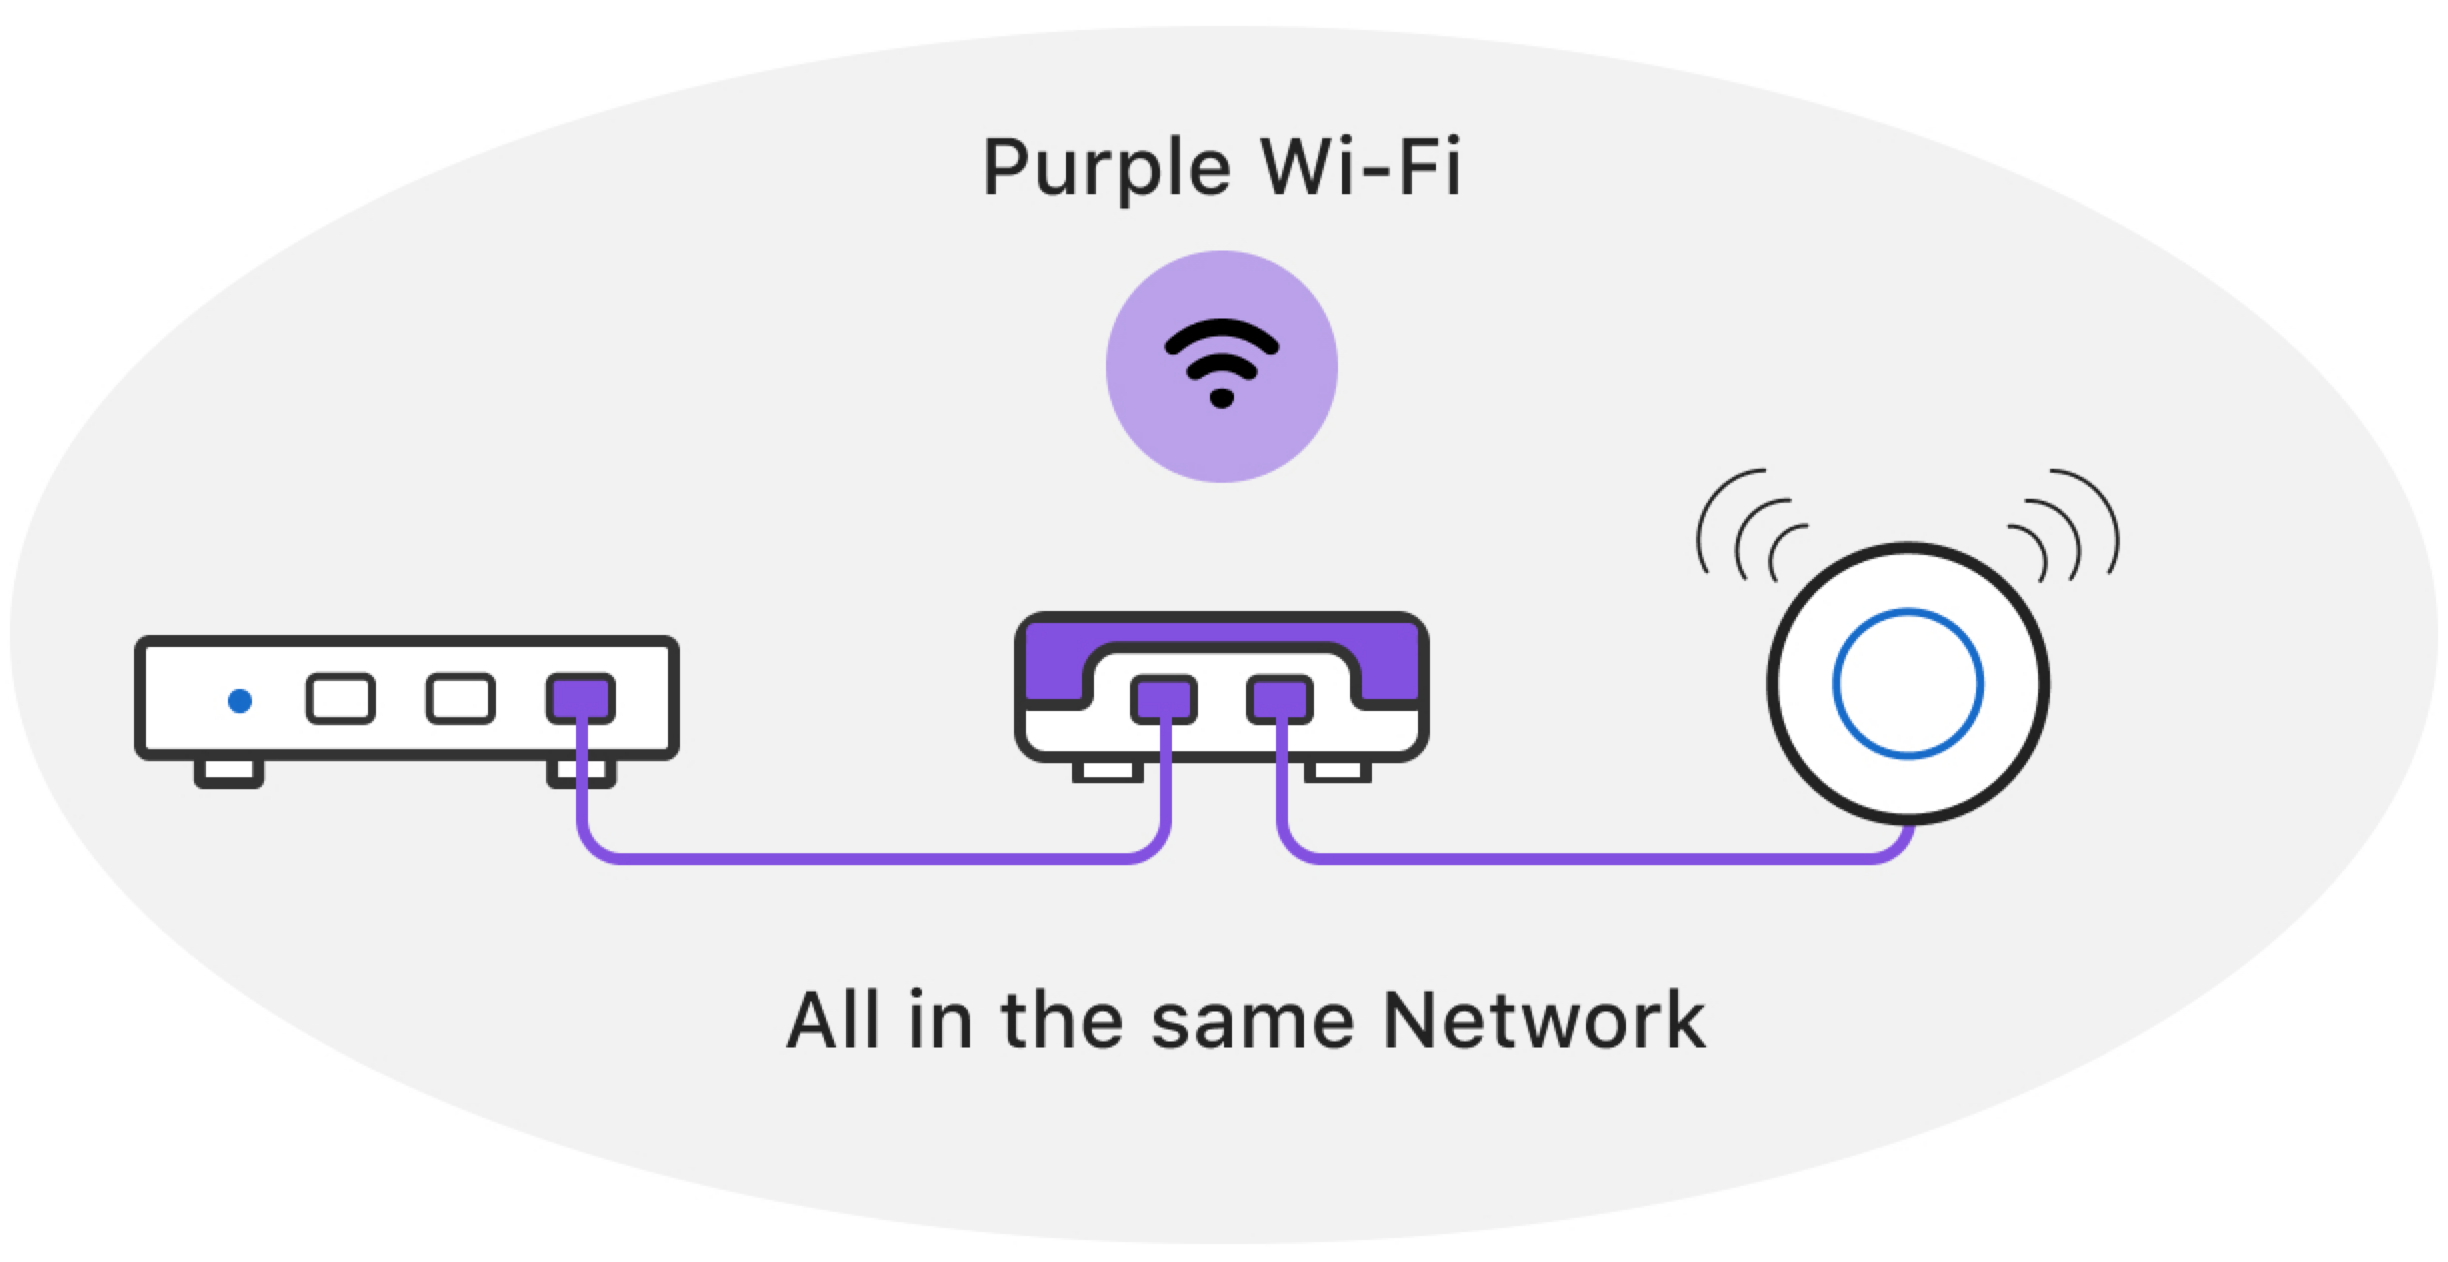 Firewalla Purple recommended configuration, router connected to the LAN port and WAN port goes to the switch or access point